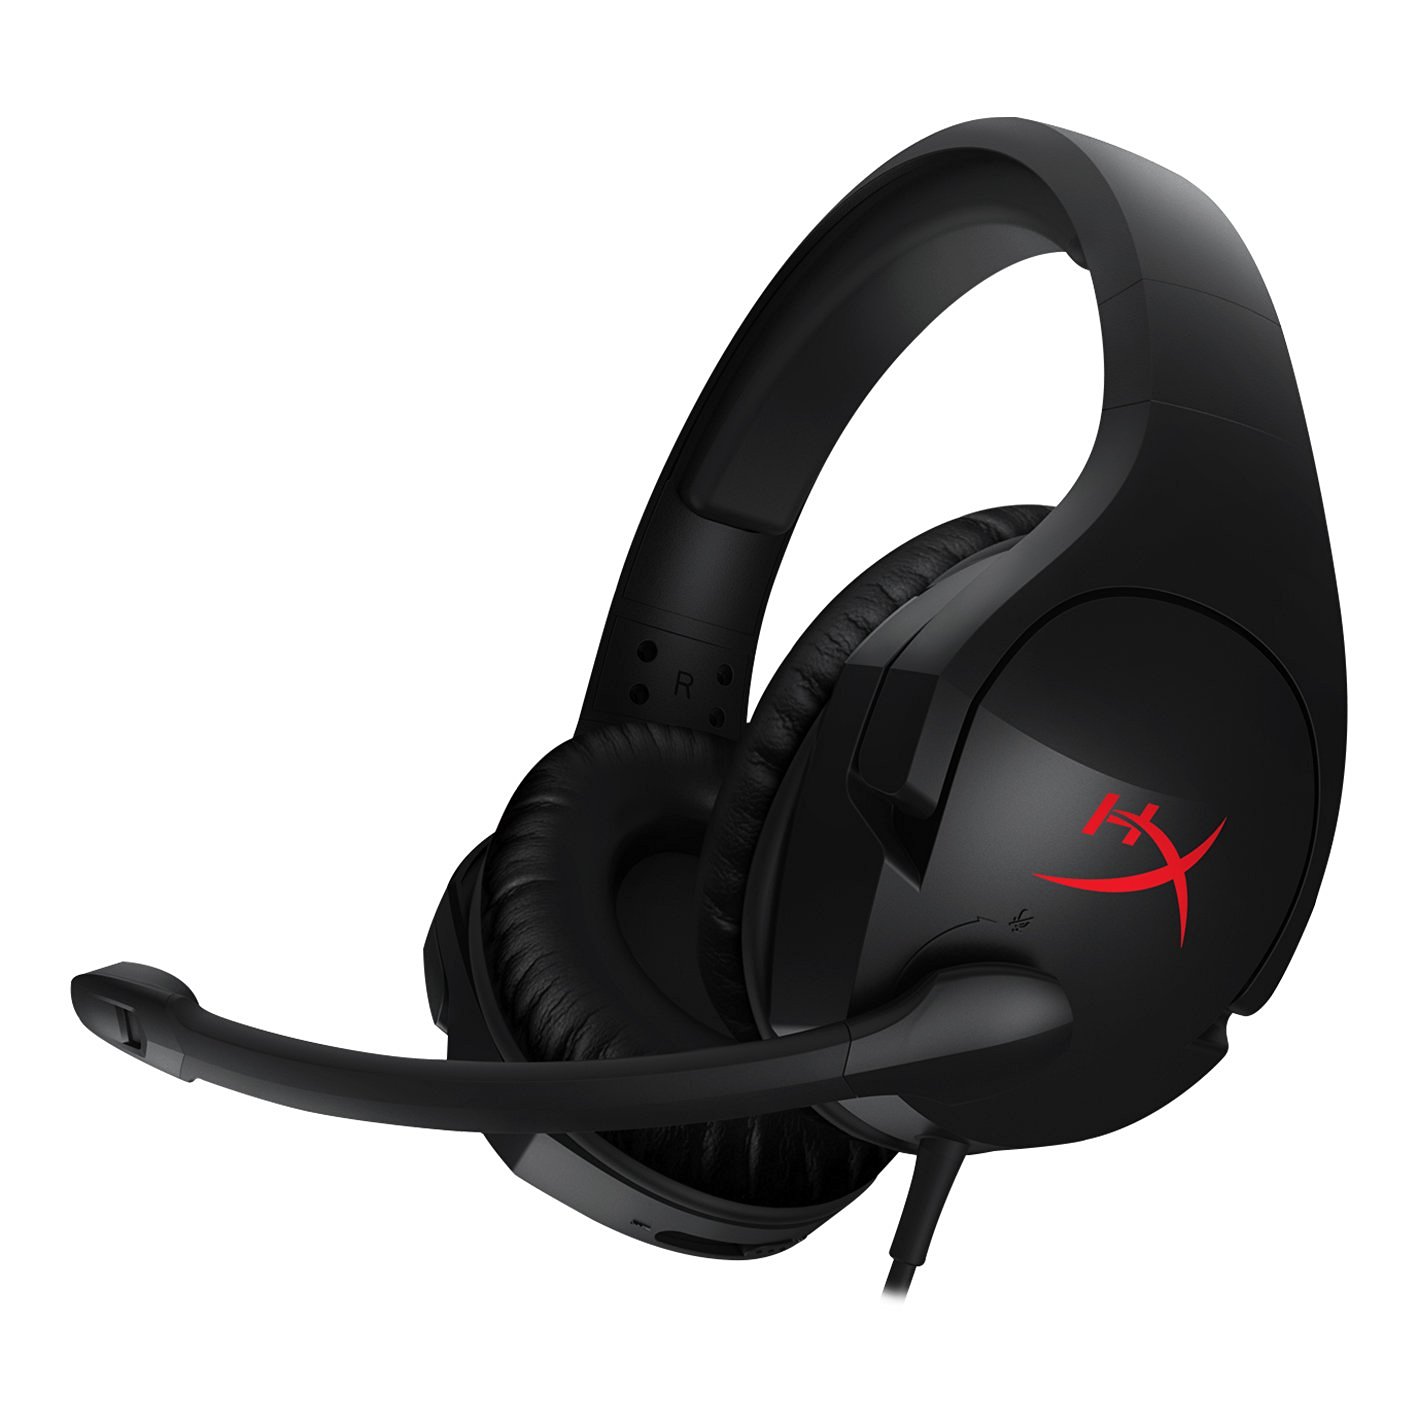 Best Budget Gaming Headsets Under $50 2017